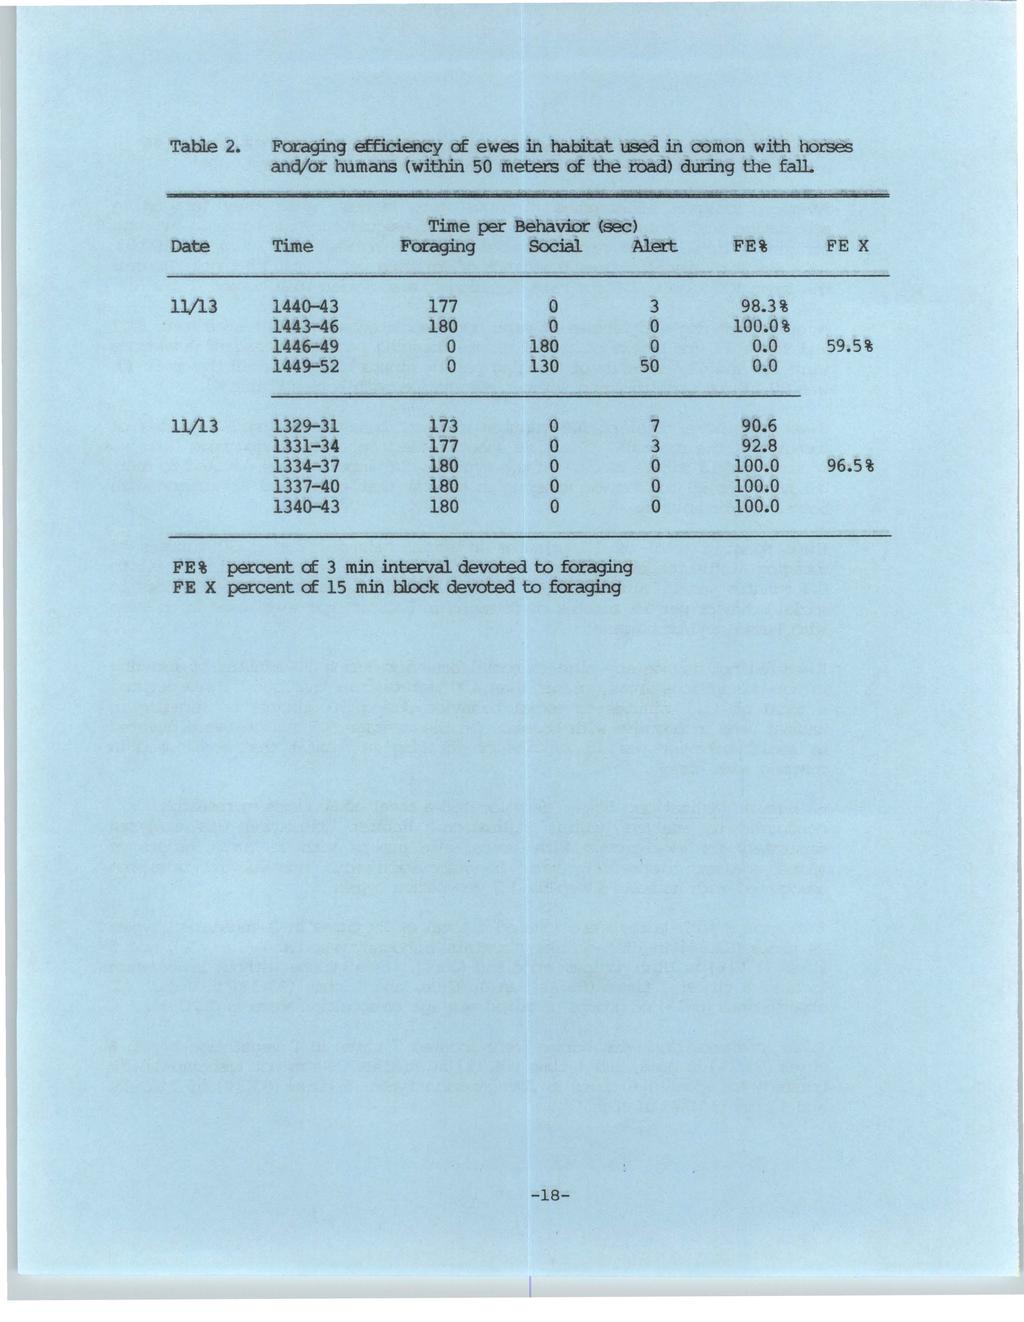 University of Wyoming National Park Service Research Center Annual Report, Vol. 10 [1986], Art. 3 Table 2.